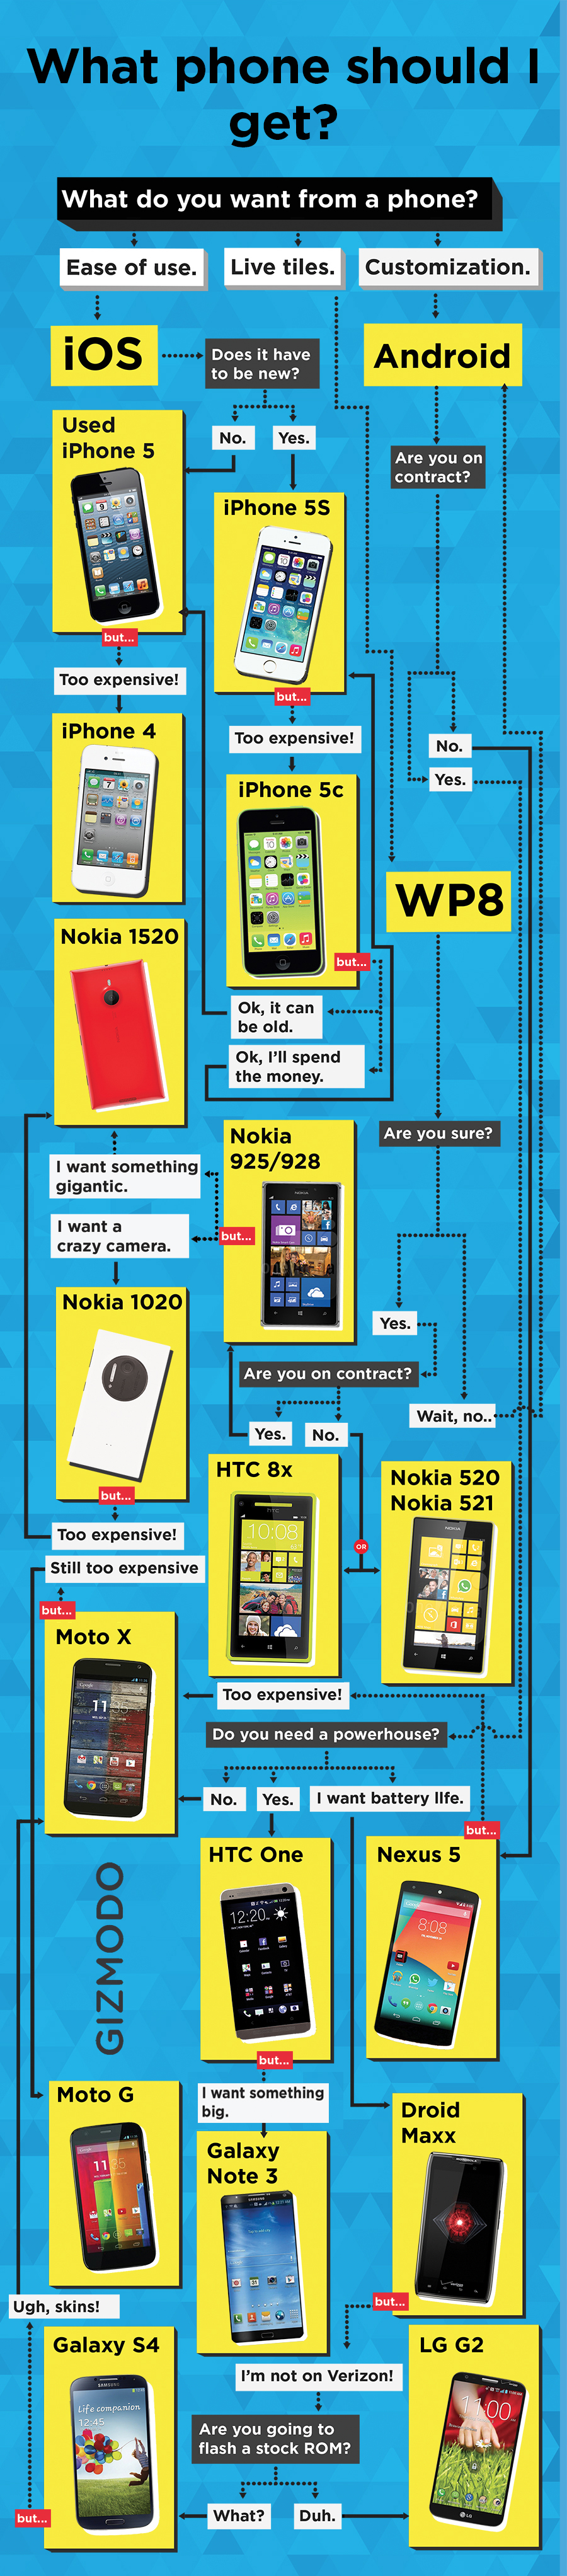 infographic_phone_choices.jpg